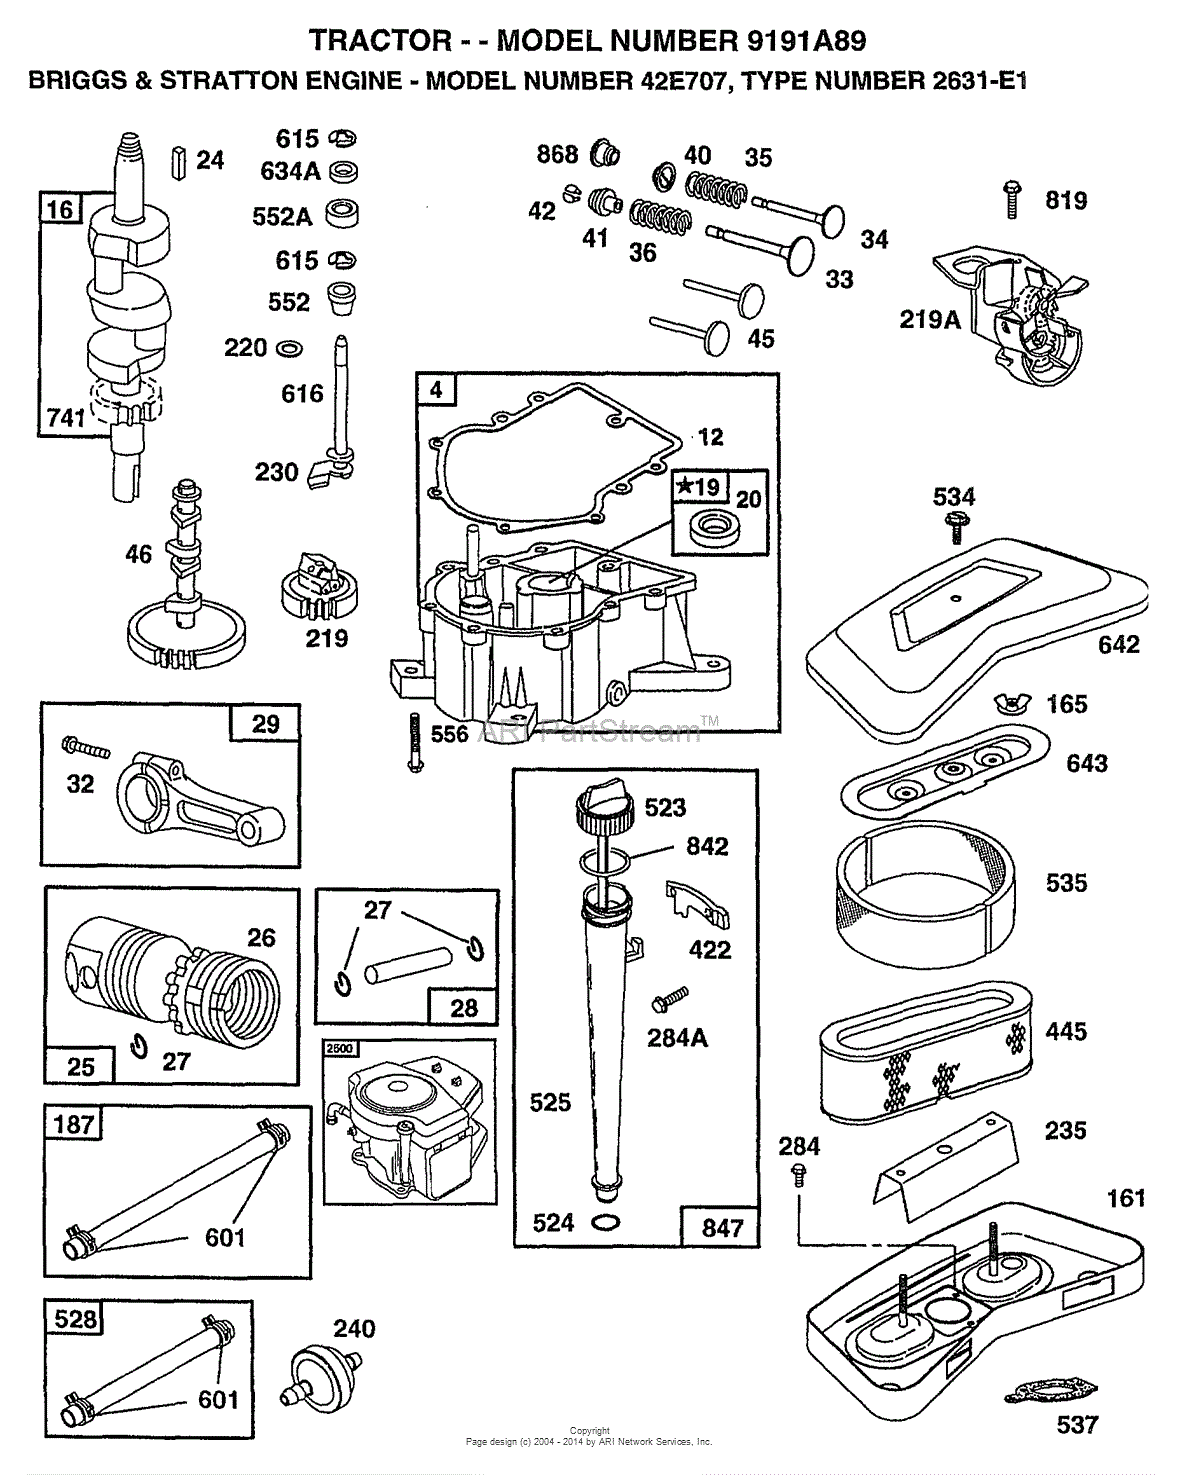 AYP/Electrolux 9191A89 (1998) Parts Diagram for ENGINE BRIGGS AND STRATTON